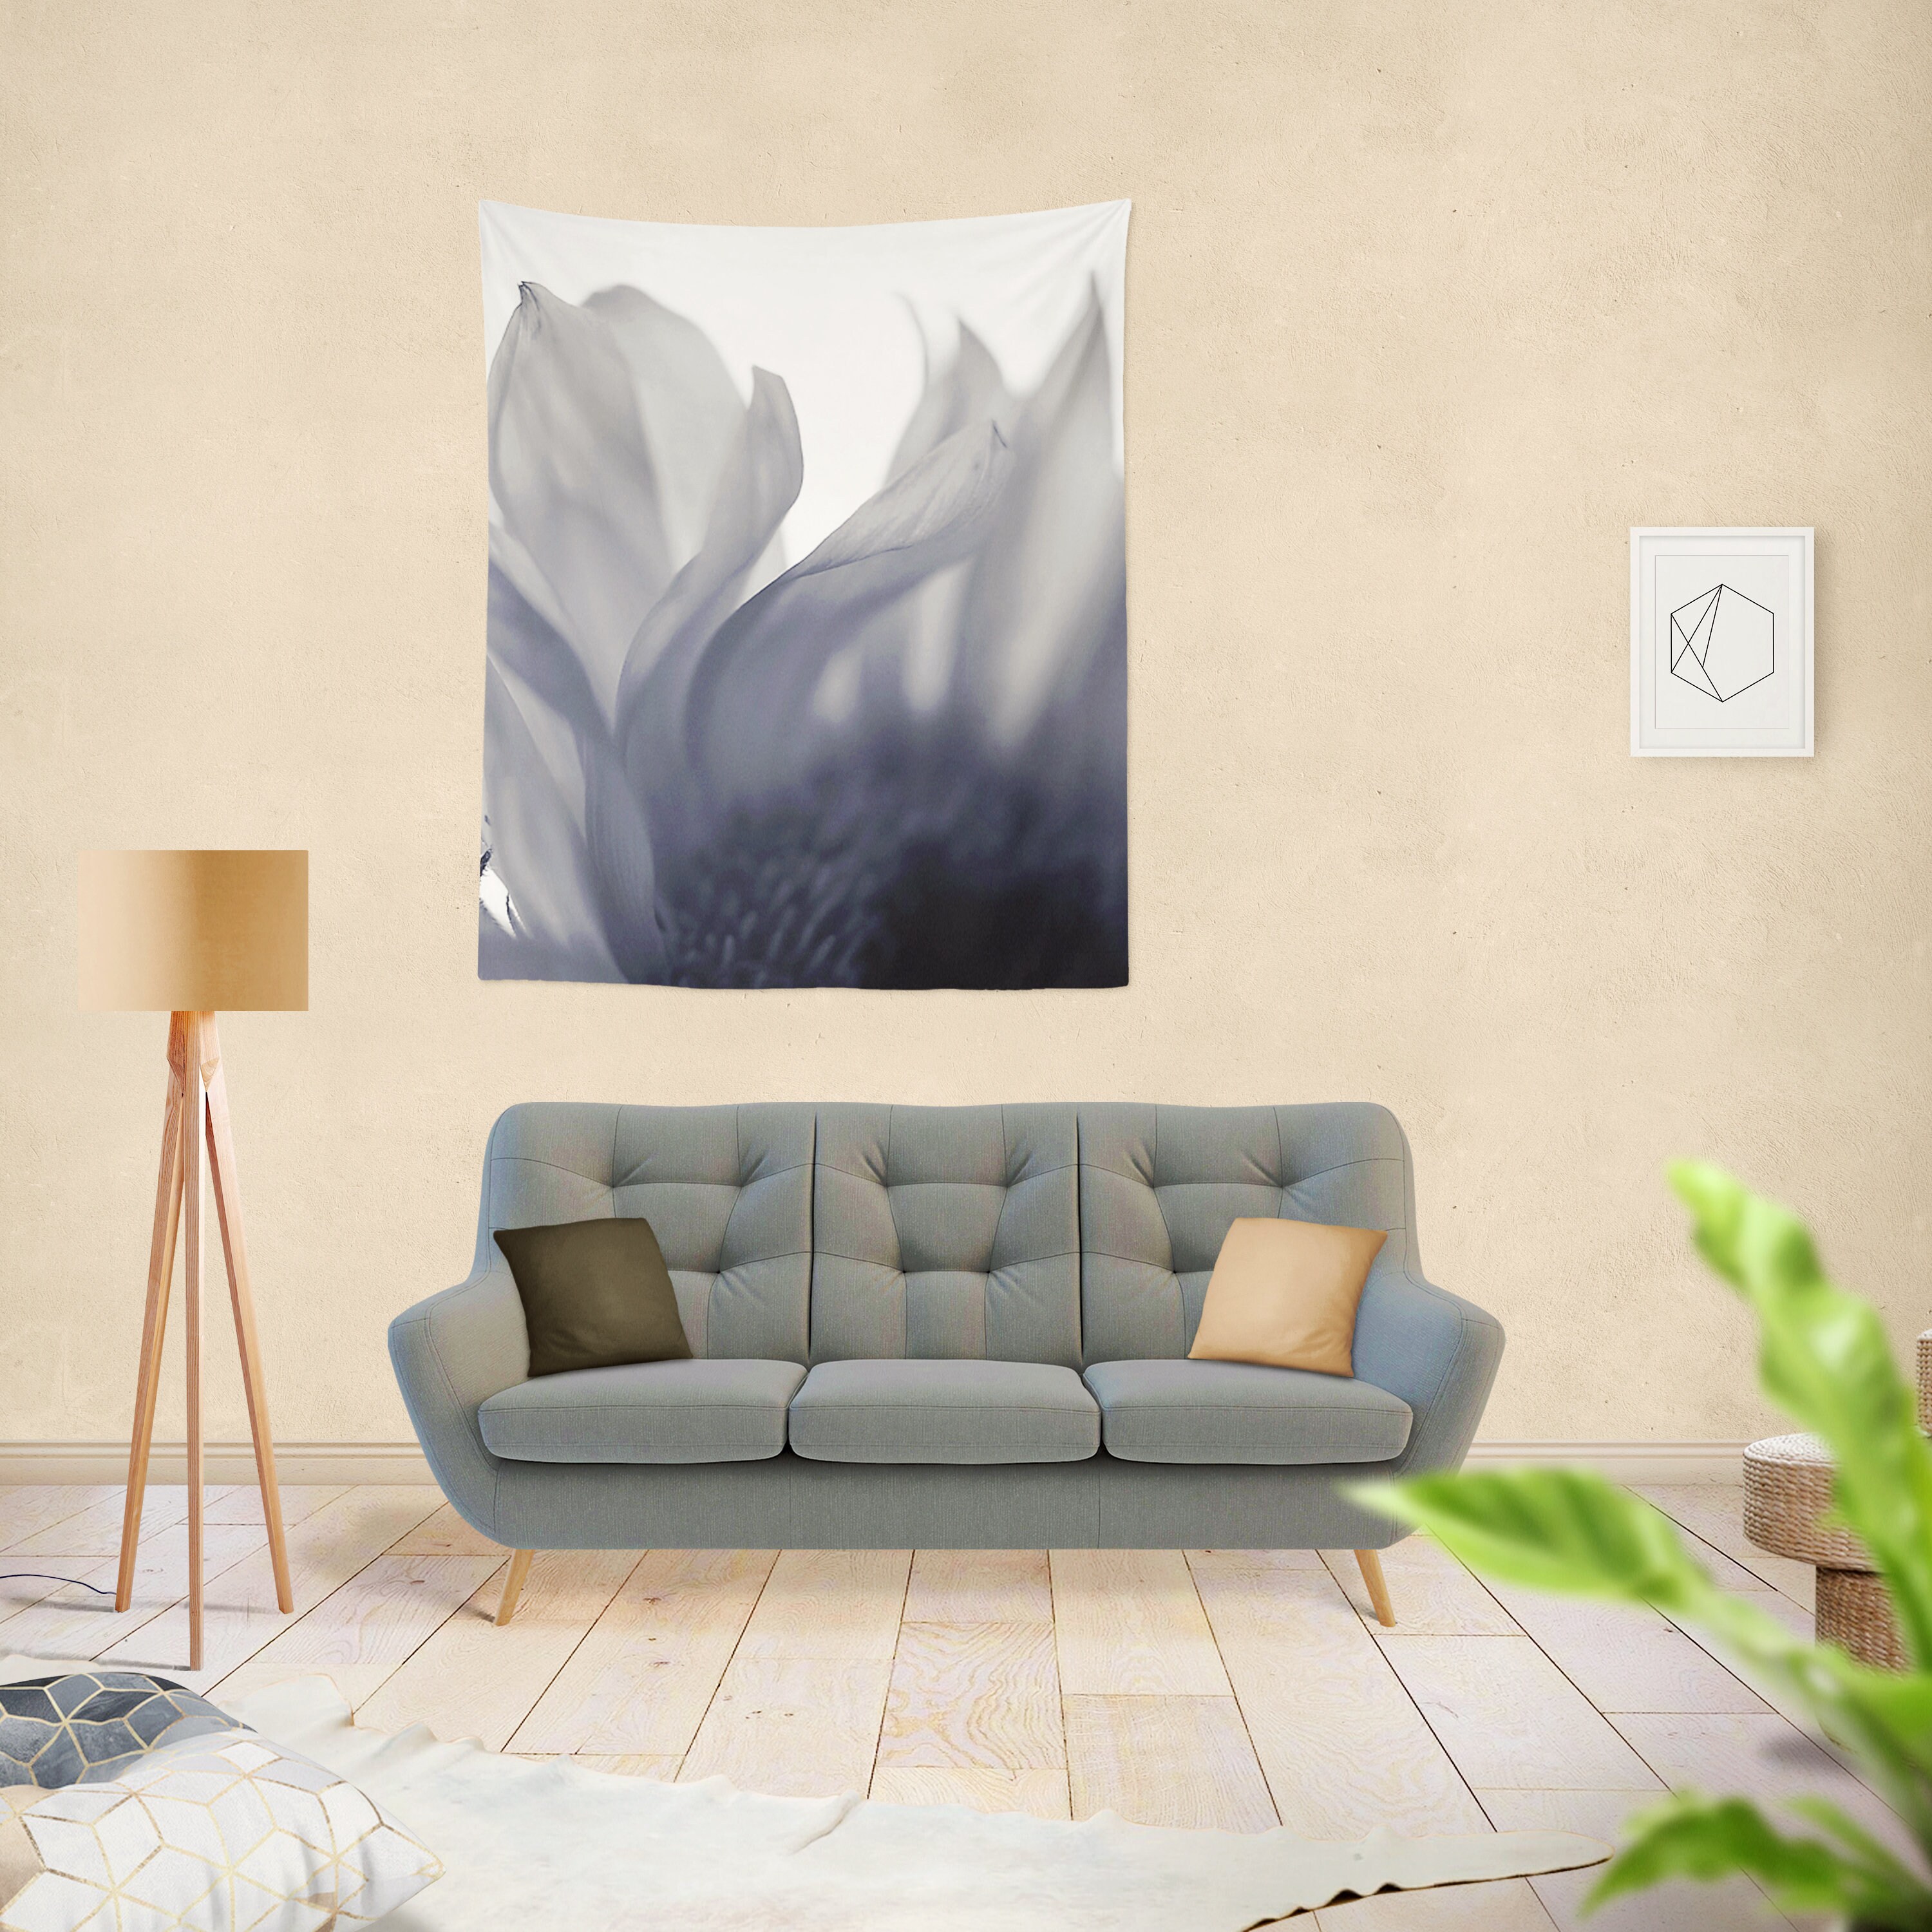 Ethereal Wall Tapestry Blue Flower Wall Hanging Floral | Etsy